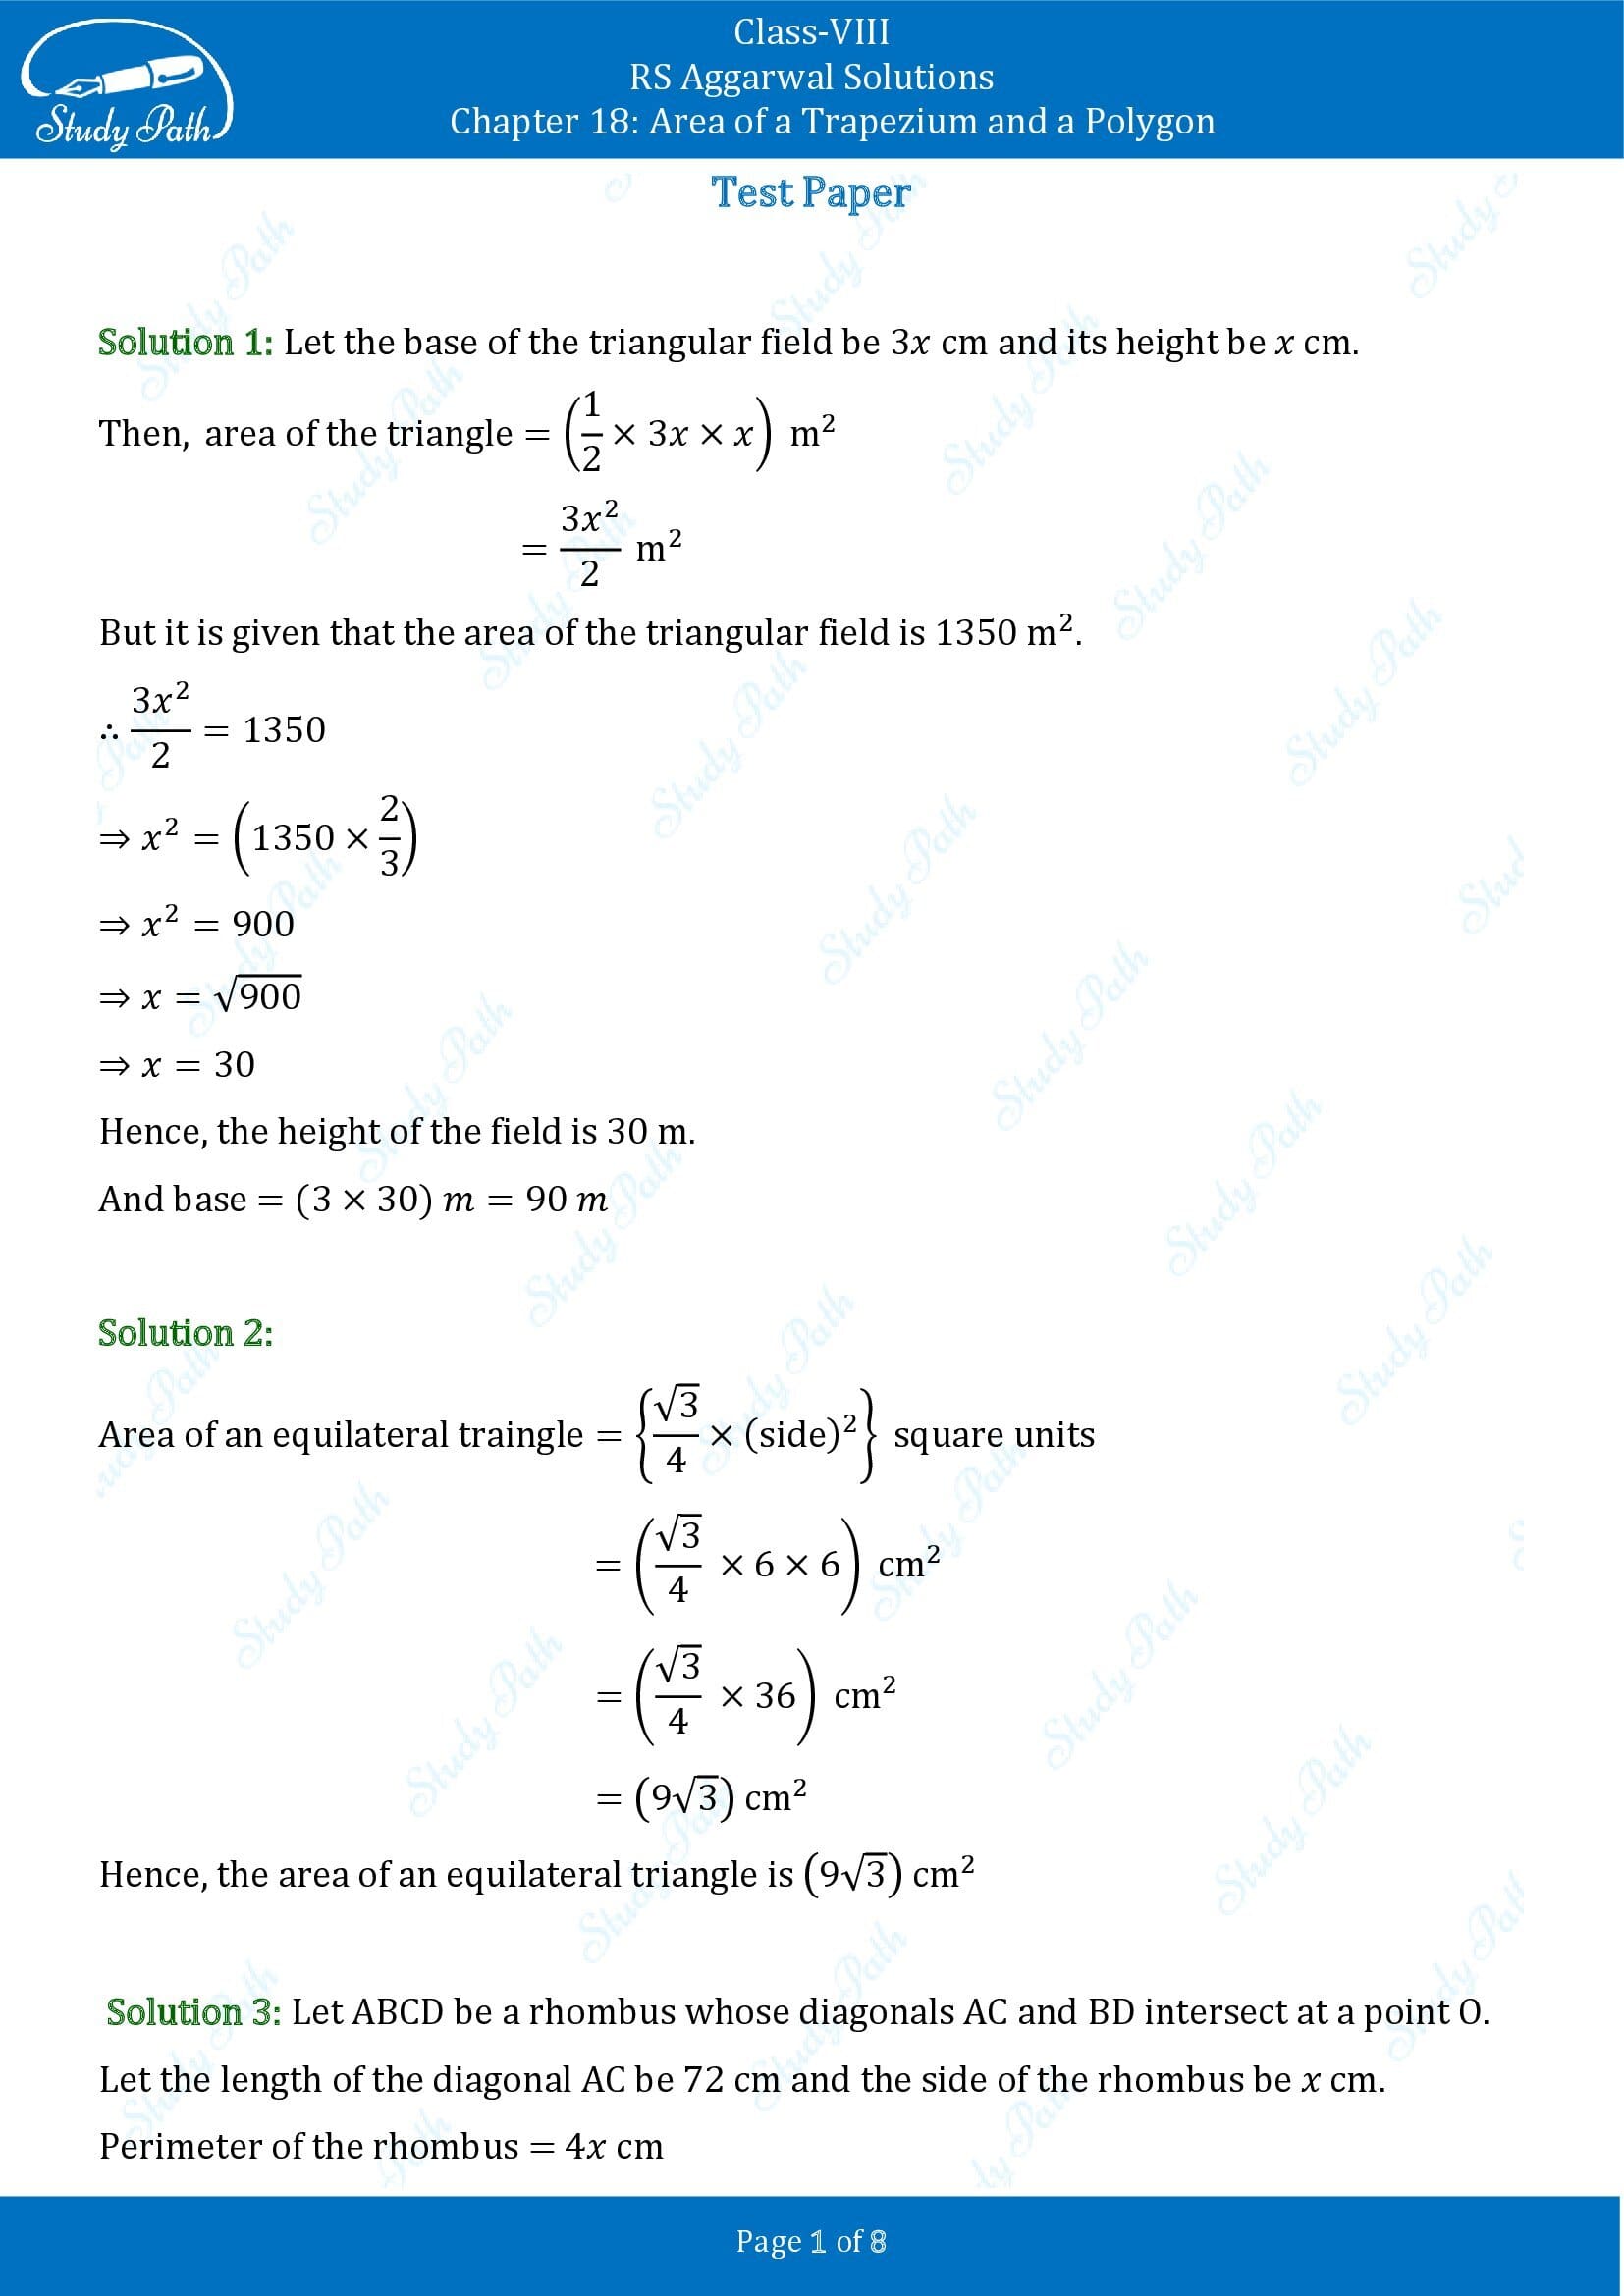 RS Aggarwal Solutions Class 8 Chapter 18 Area of a Trapezium and a Polygon Test Paper 00001